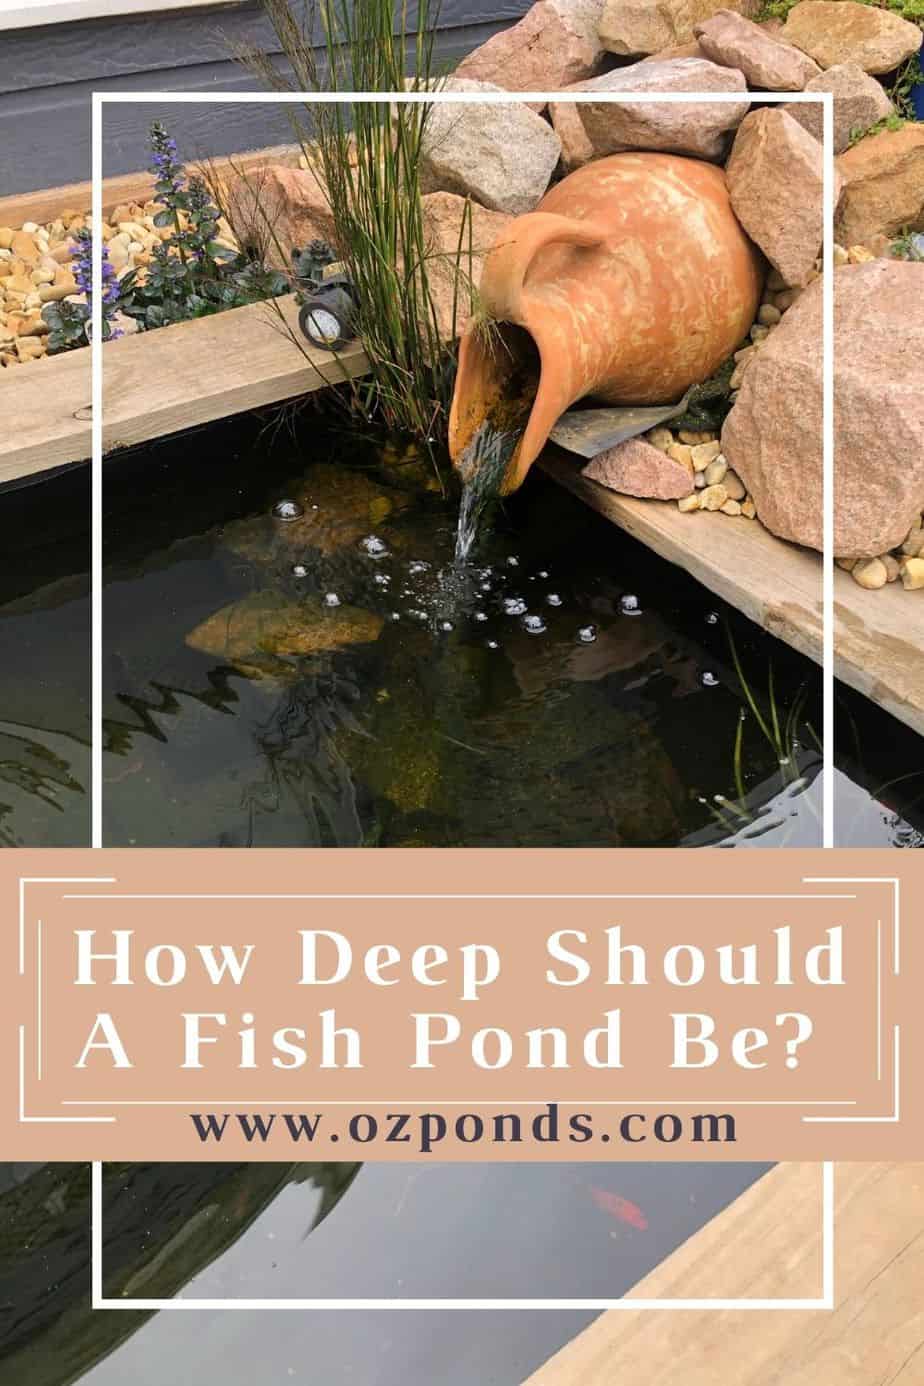 How deep should a fish pond be